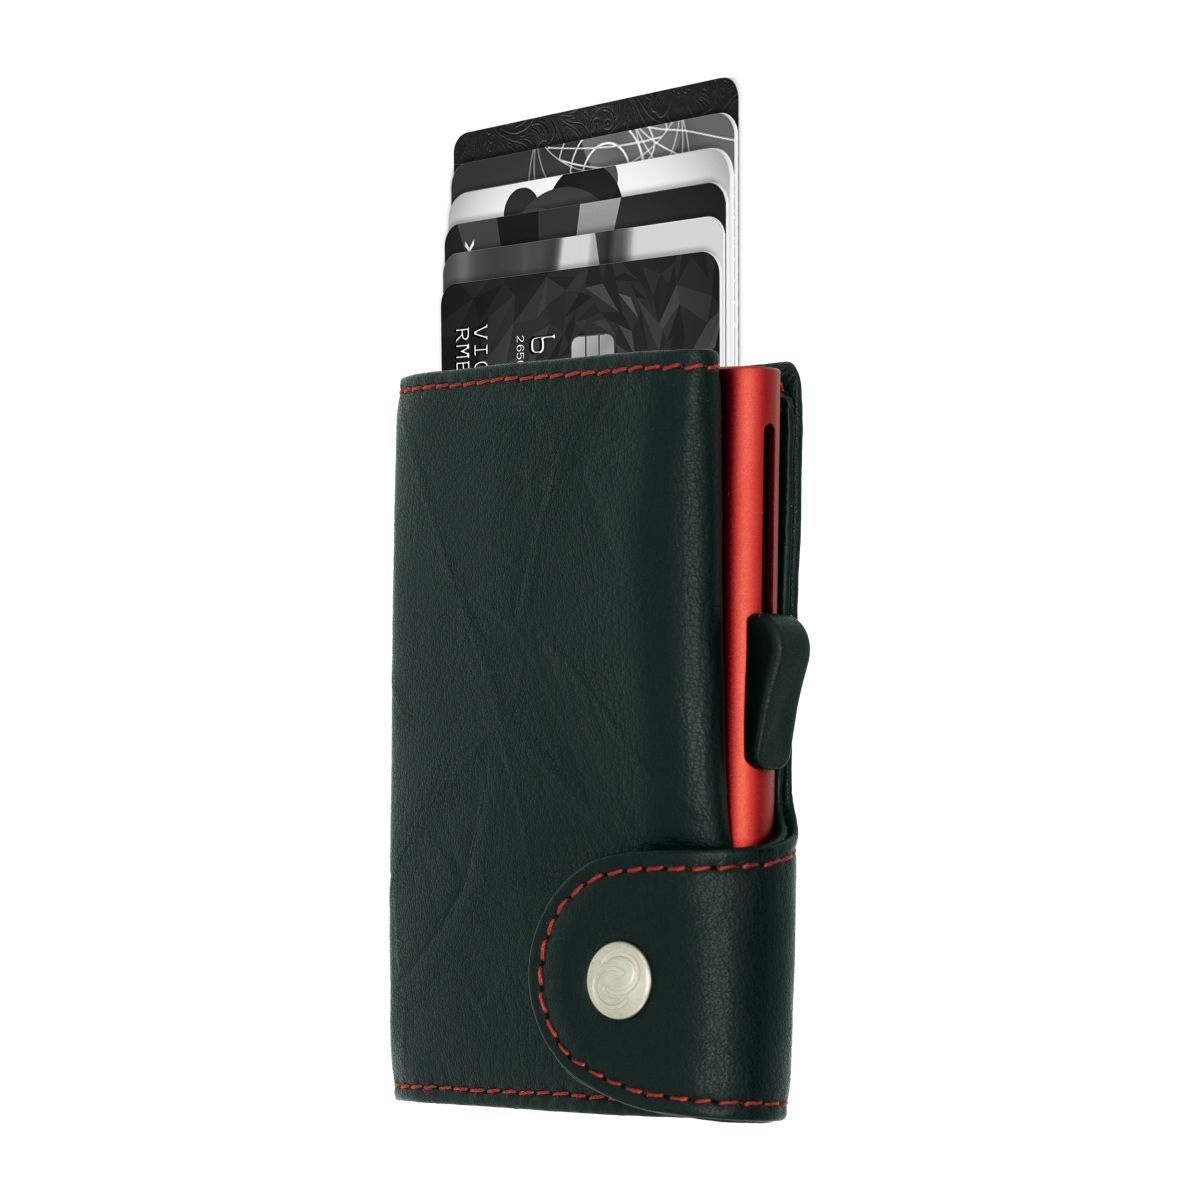 C-Secure Aluminum Card Holder with Genuine Leather - Black / Red